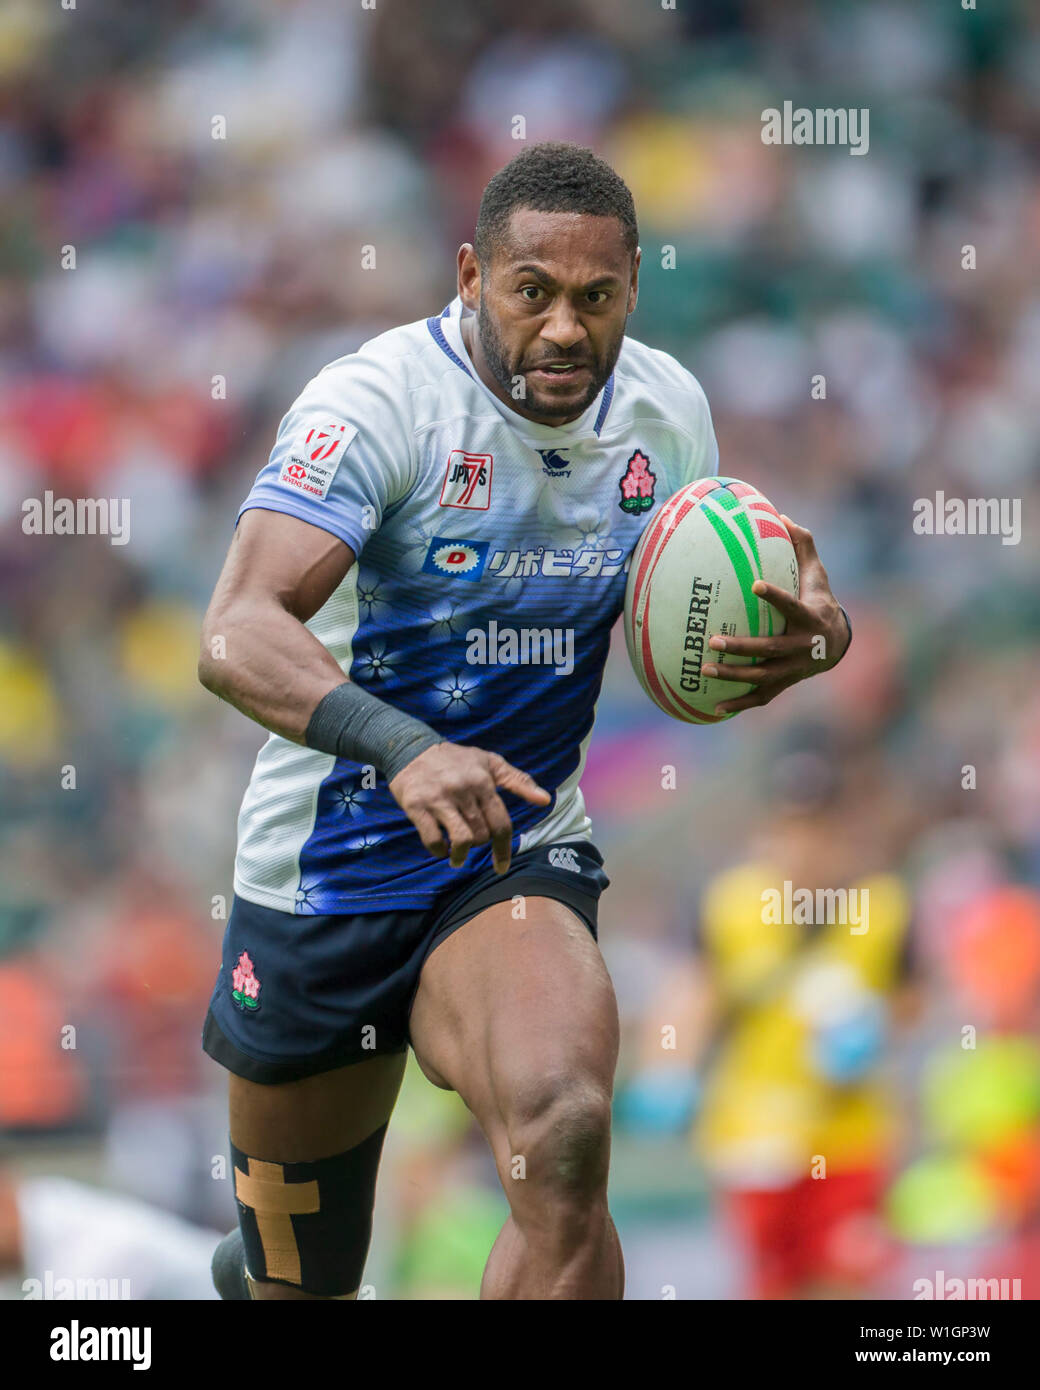 London, UK. 26th May, 2019. The penultimate tournament of the HSBC World Rugby Sevens Series on 25 and 26 May 2019 in London (GB). Lote Tuqiri (Japan, 2). Credit: Jürgen Kessler/dpa/Alamy Live News Stock Photo